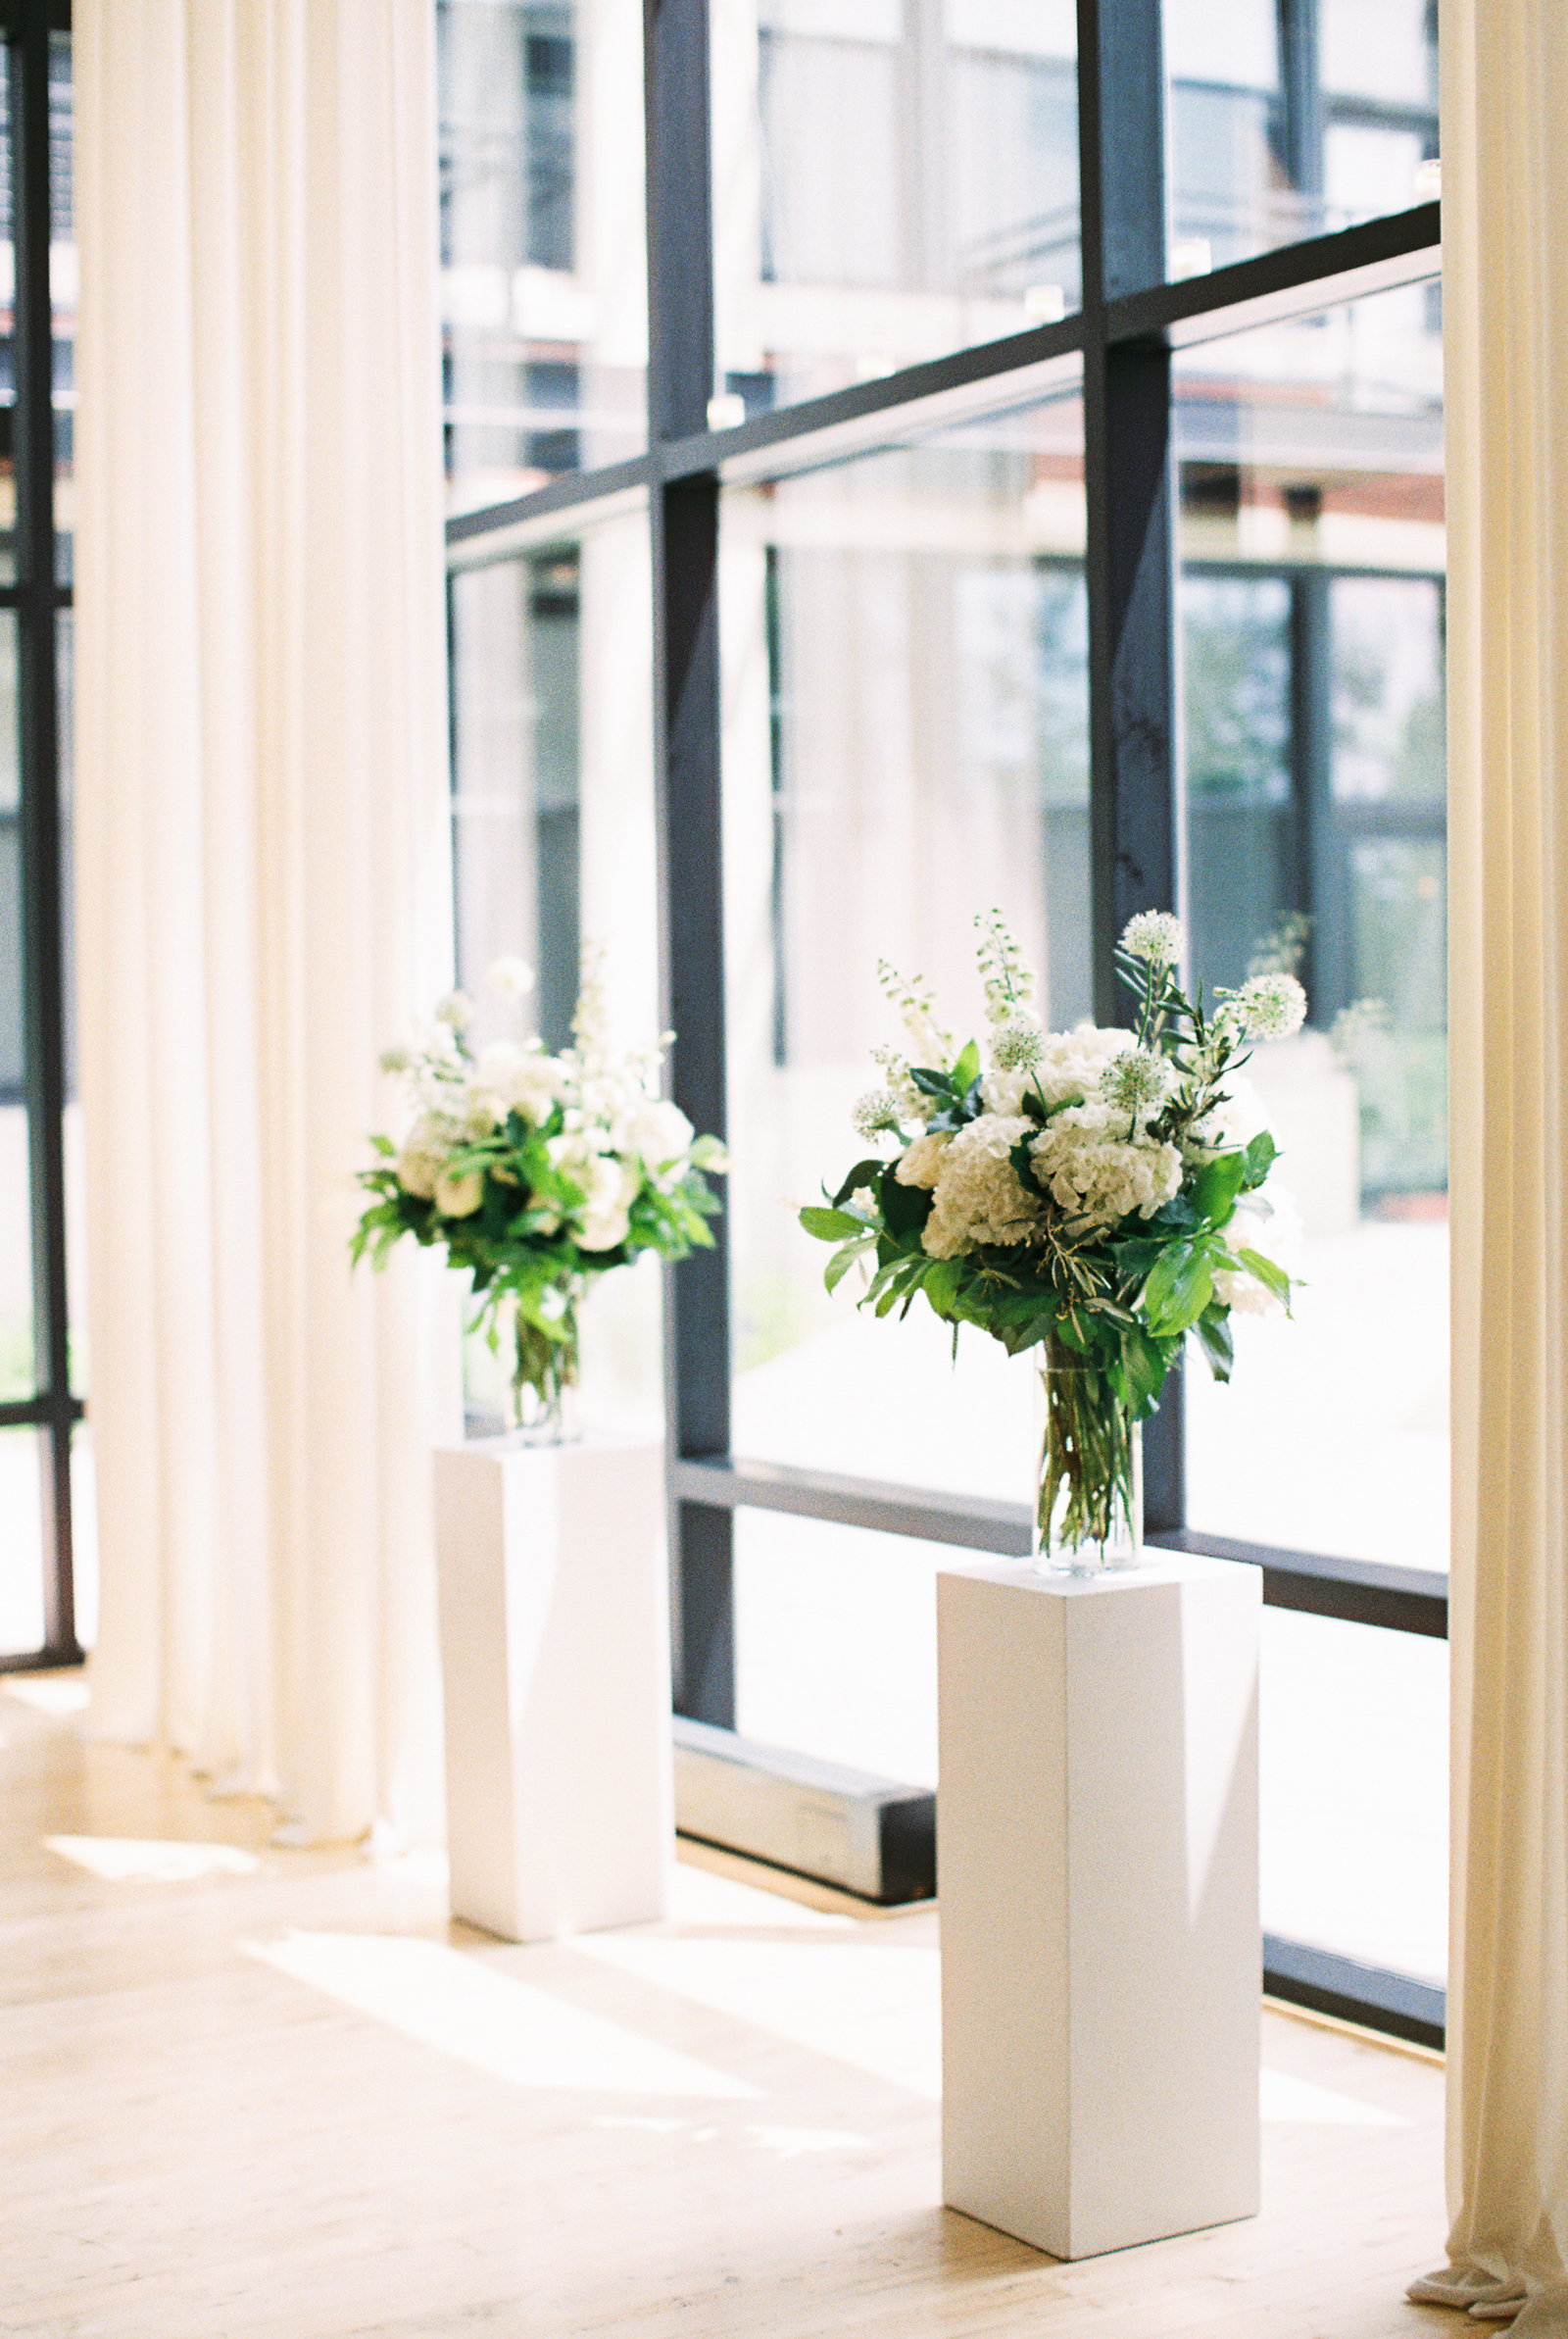 Greenhouse Loft Chicago minimalist and monochromatic wedding with white altar flowers of hydrangea, ranunculus, and garden roses.